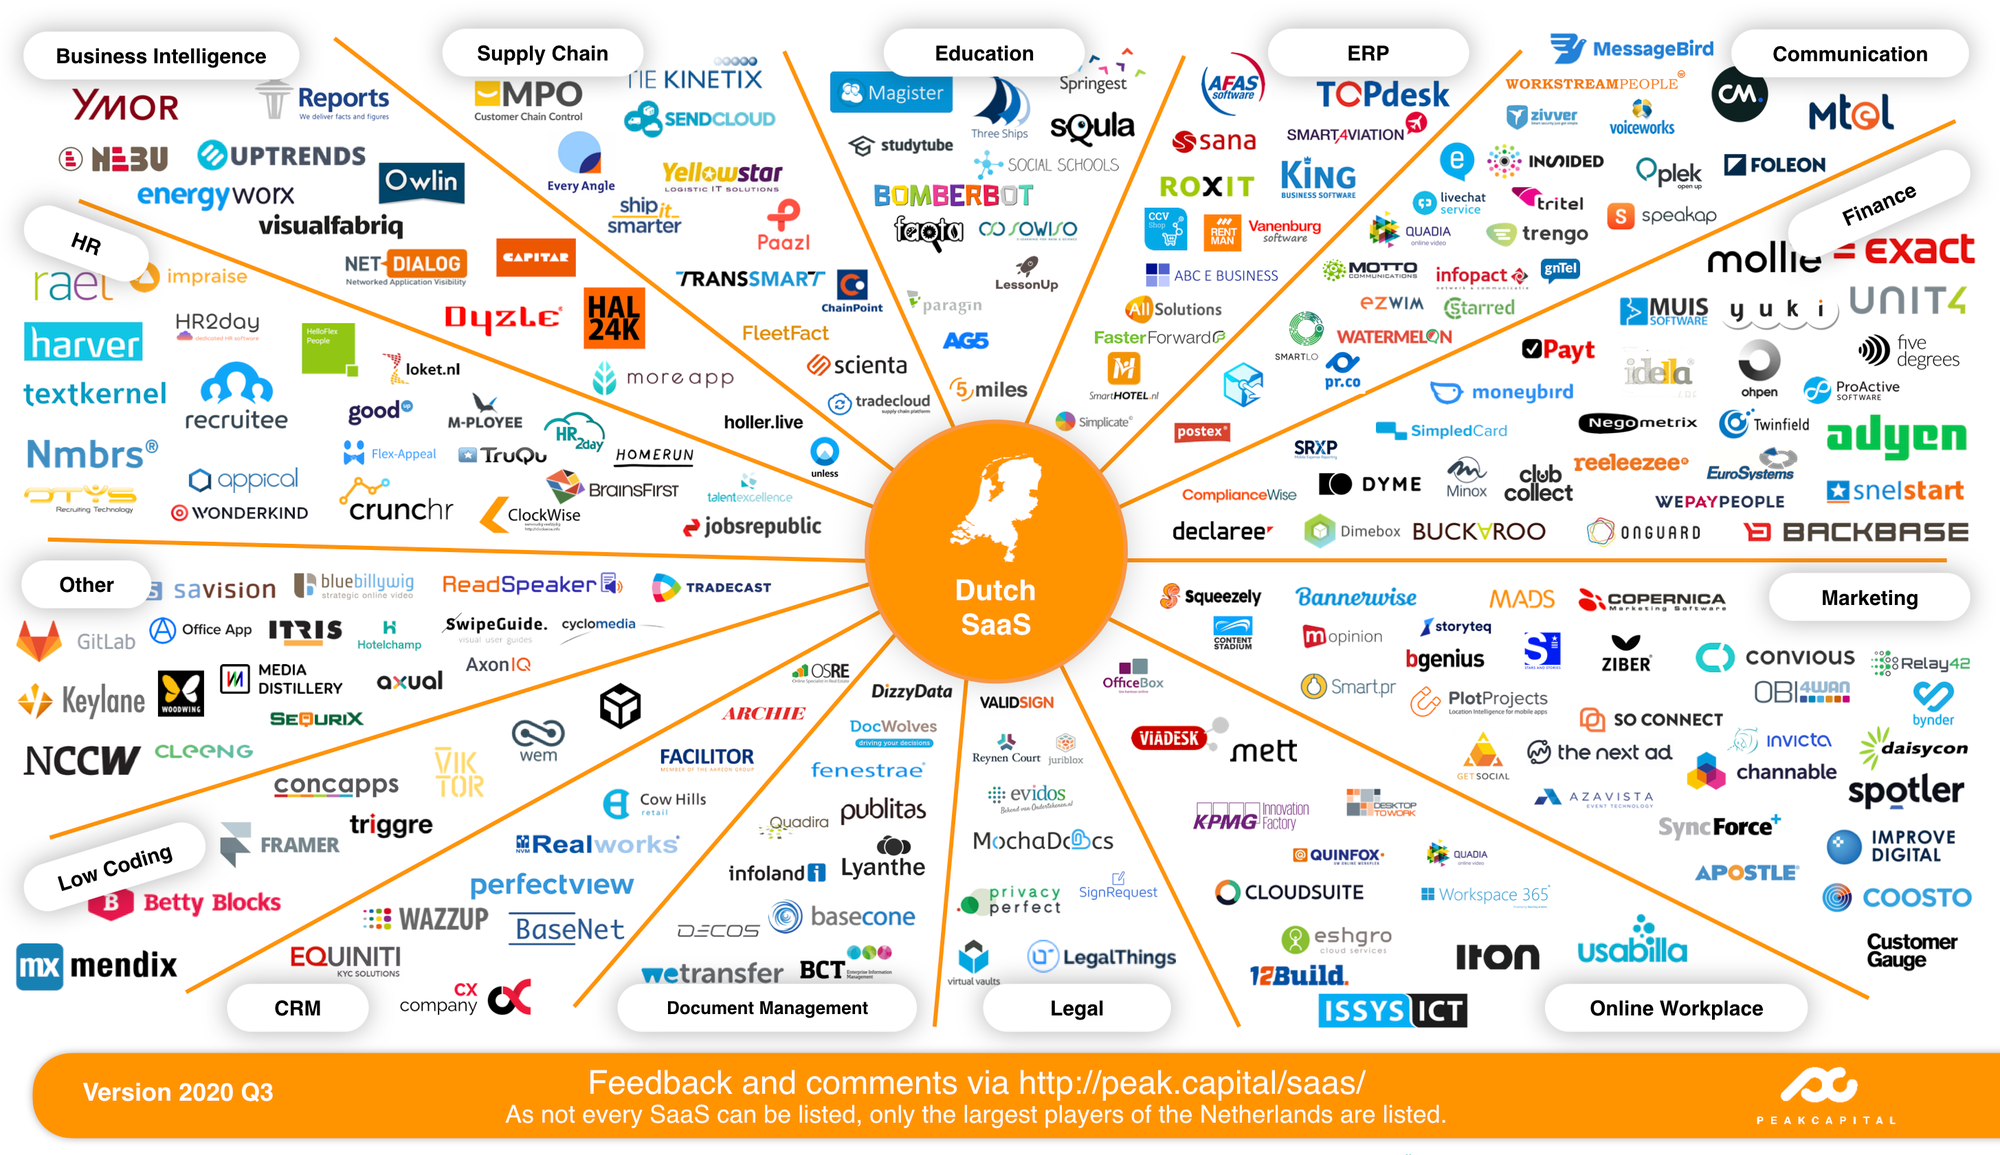 Dutch SaaS Landscape (2020 Q3): A snapshot of “who’s who” in Software-as-a-Service.